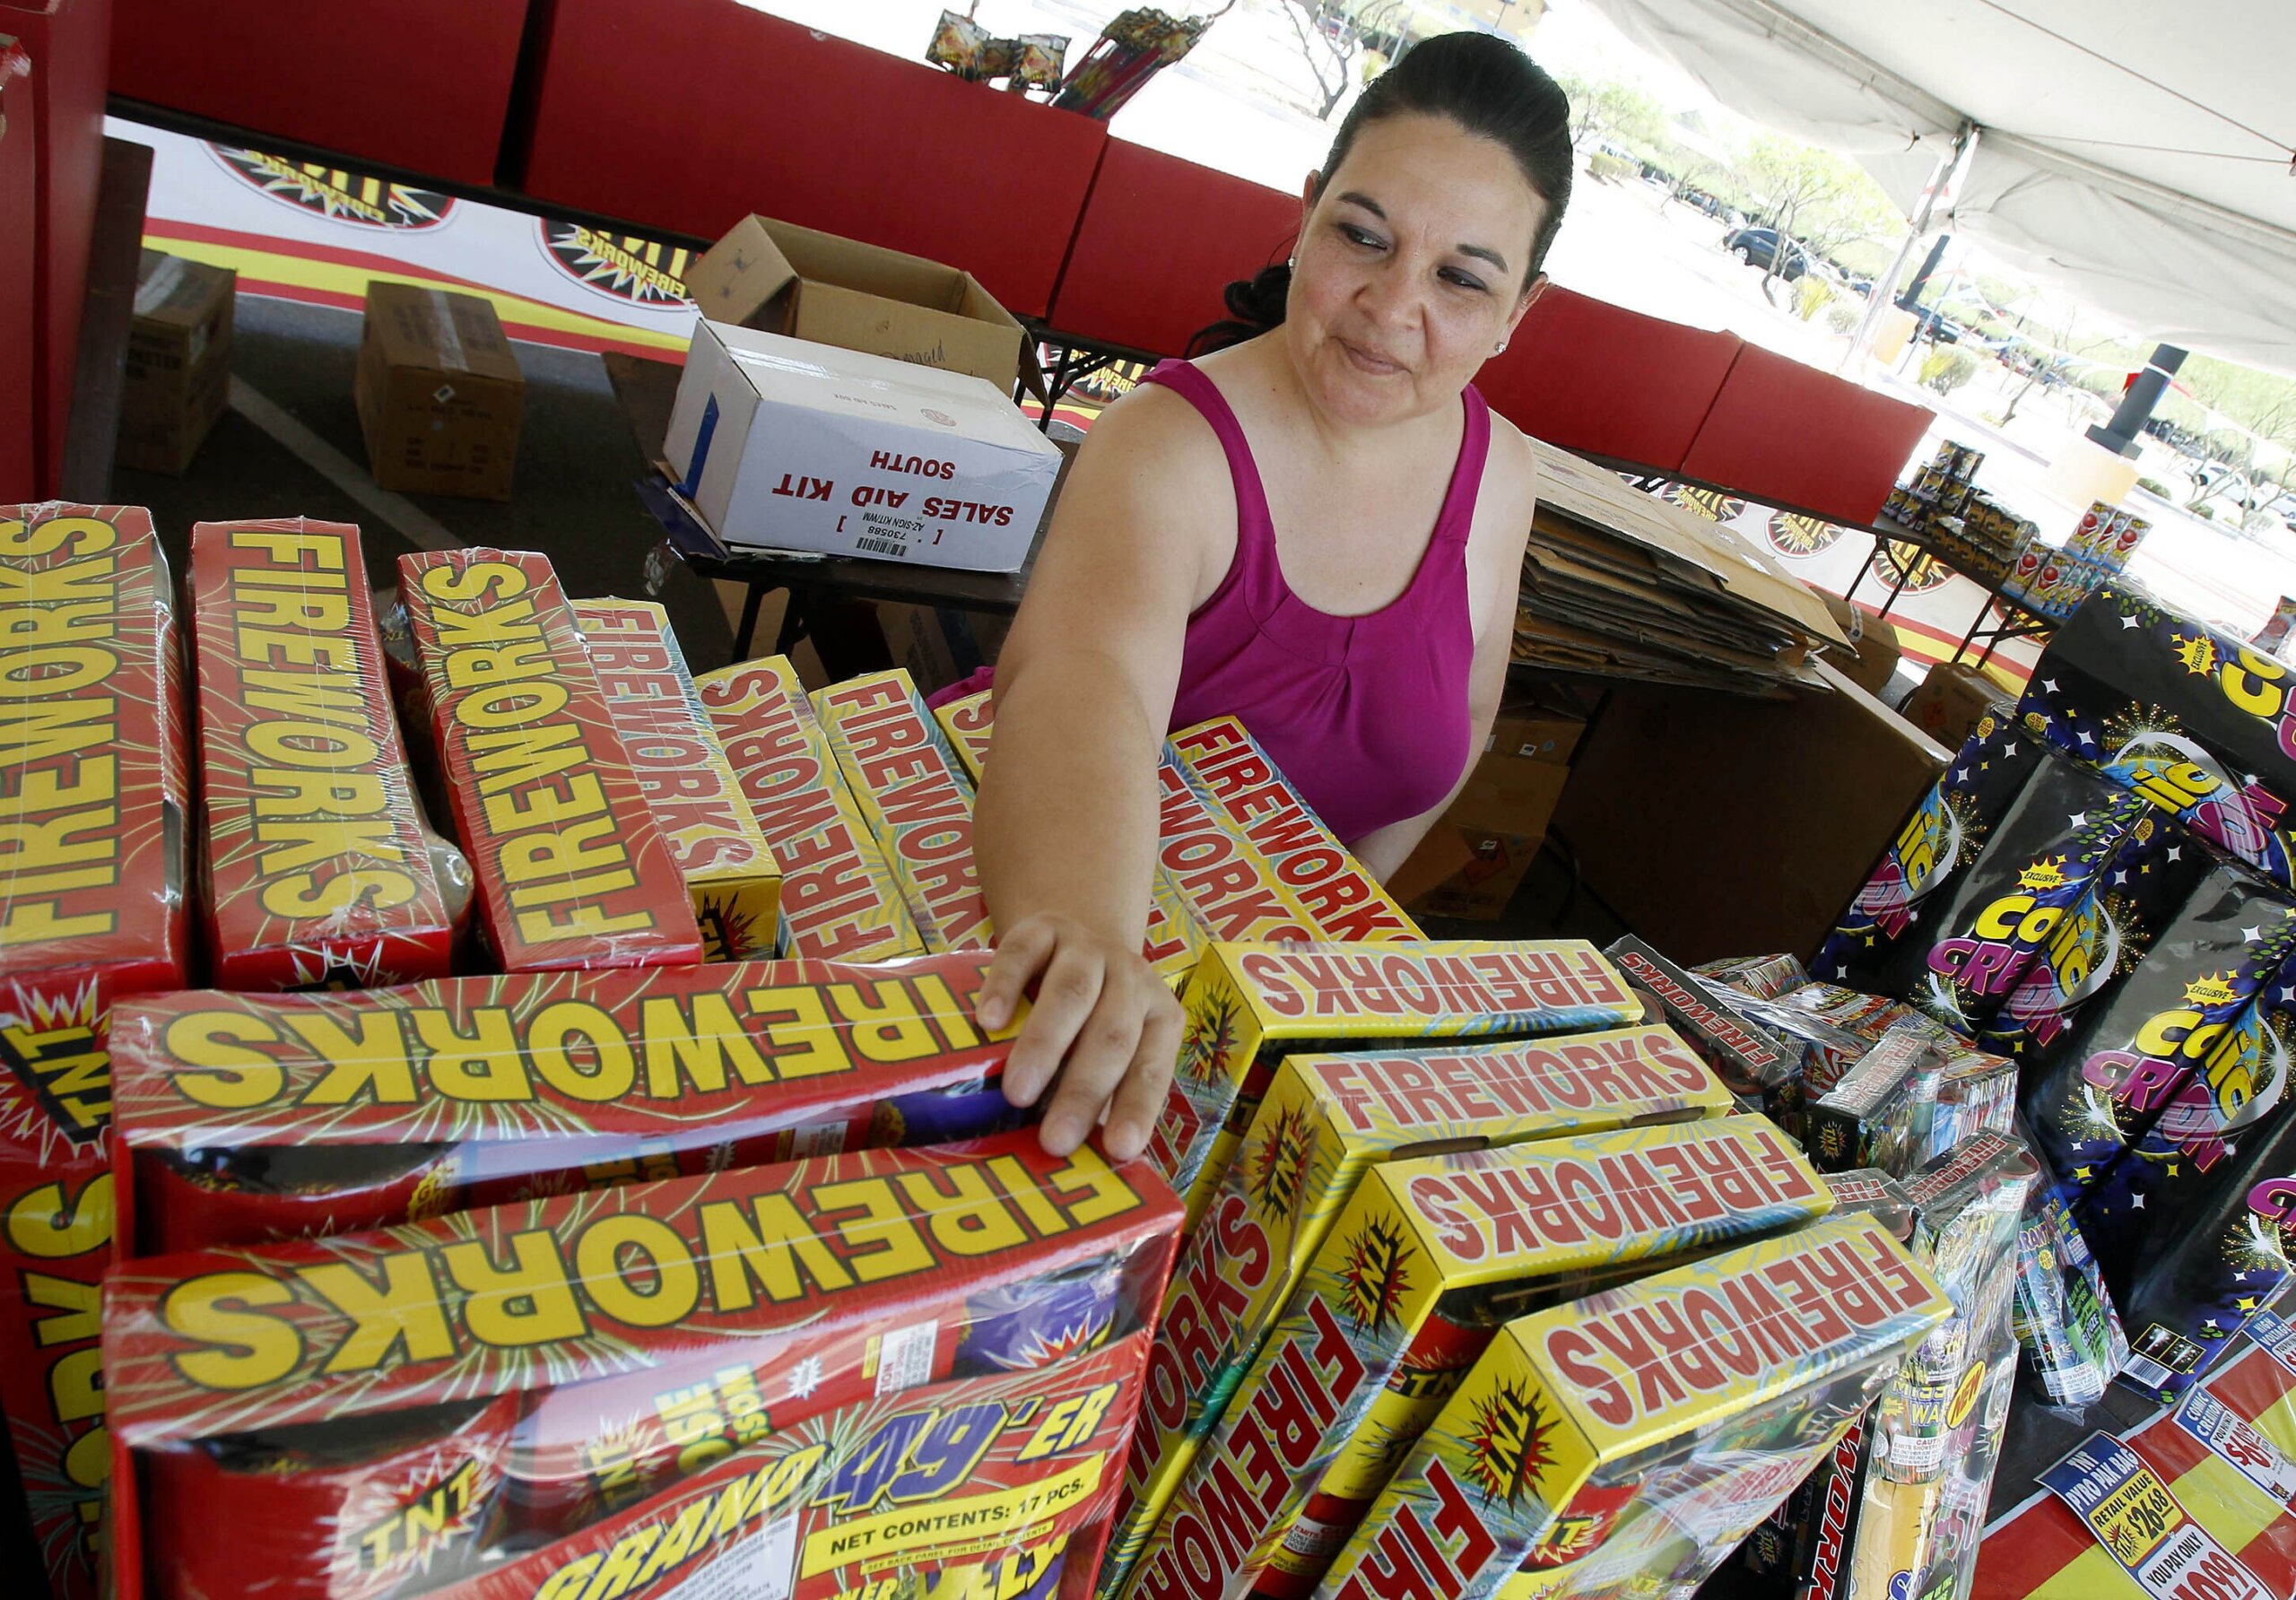 Behind the scenes of the (legal) DCarea fireworks stand A tradition